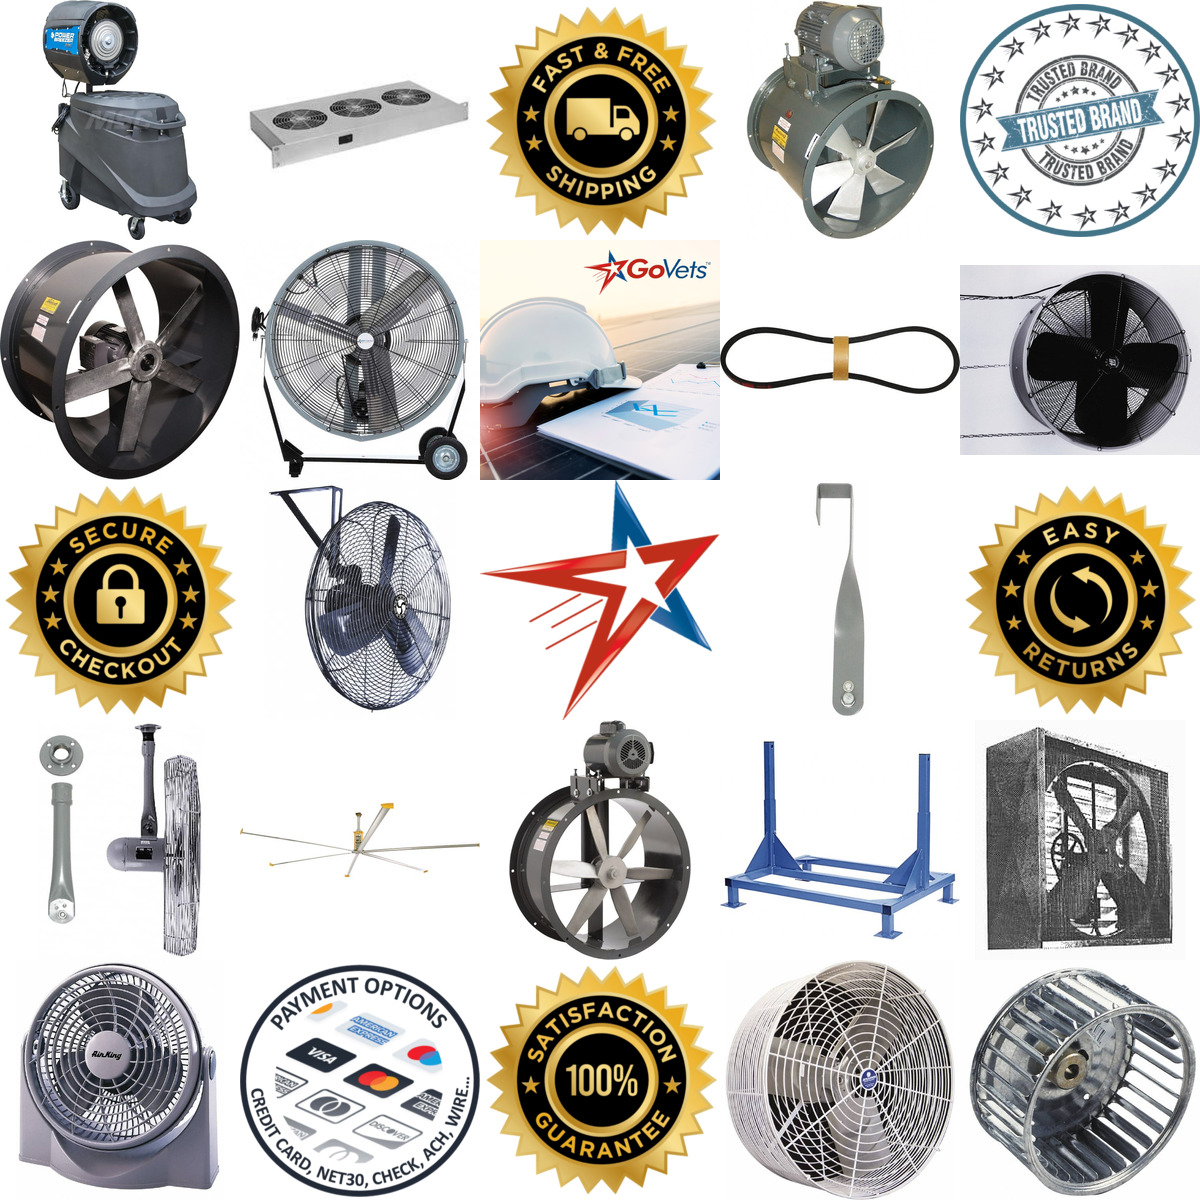 A selection of Fans products on GoVets